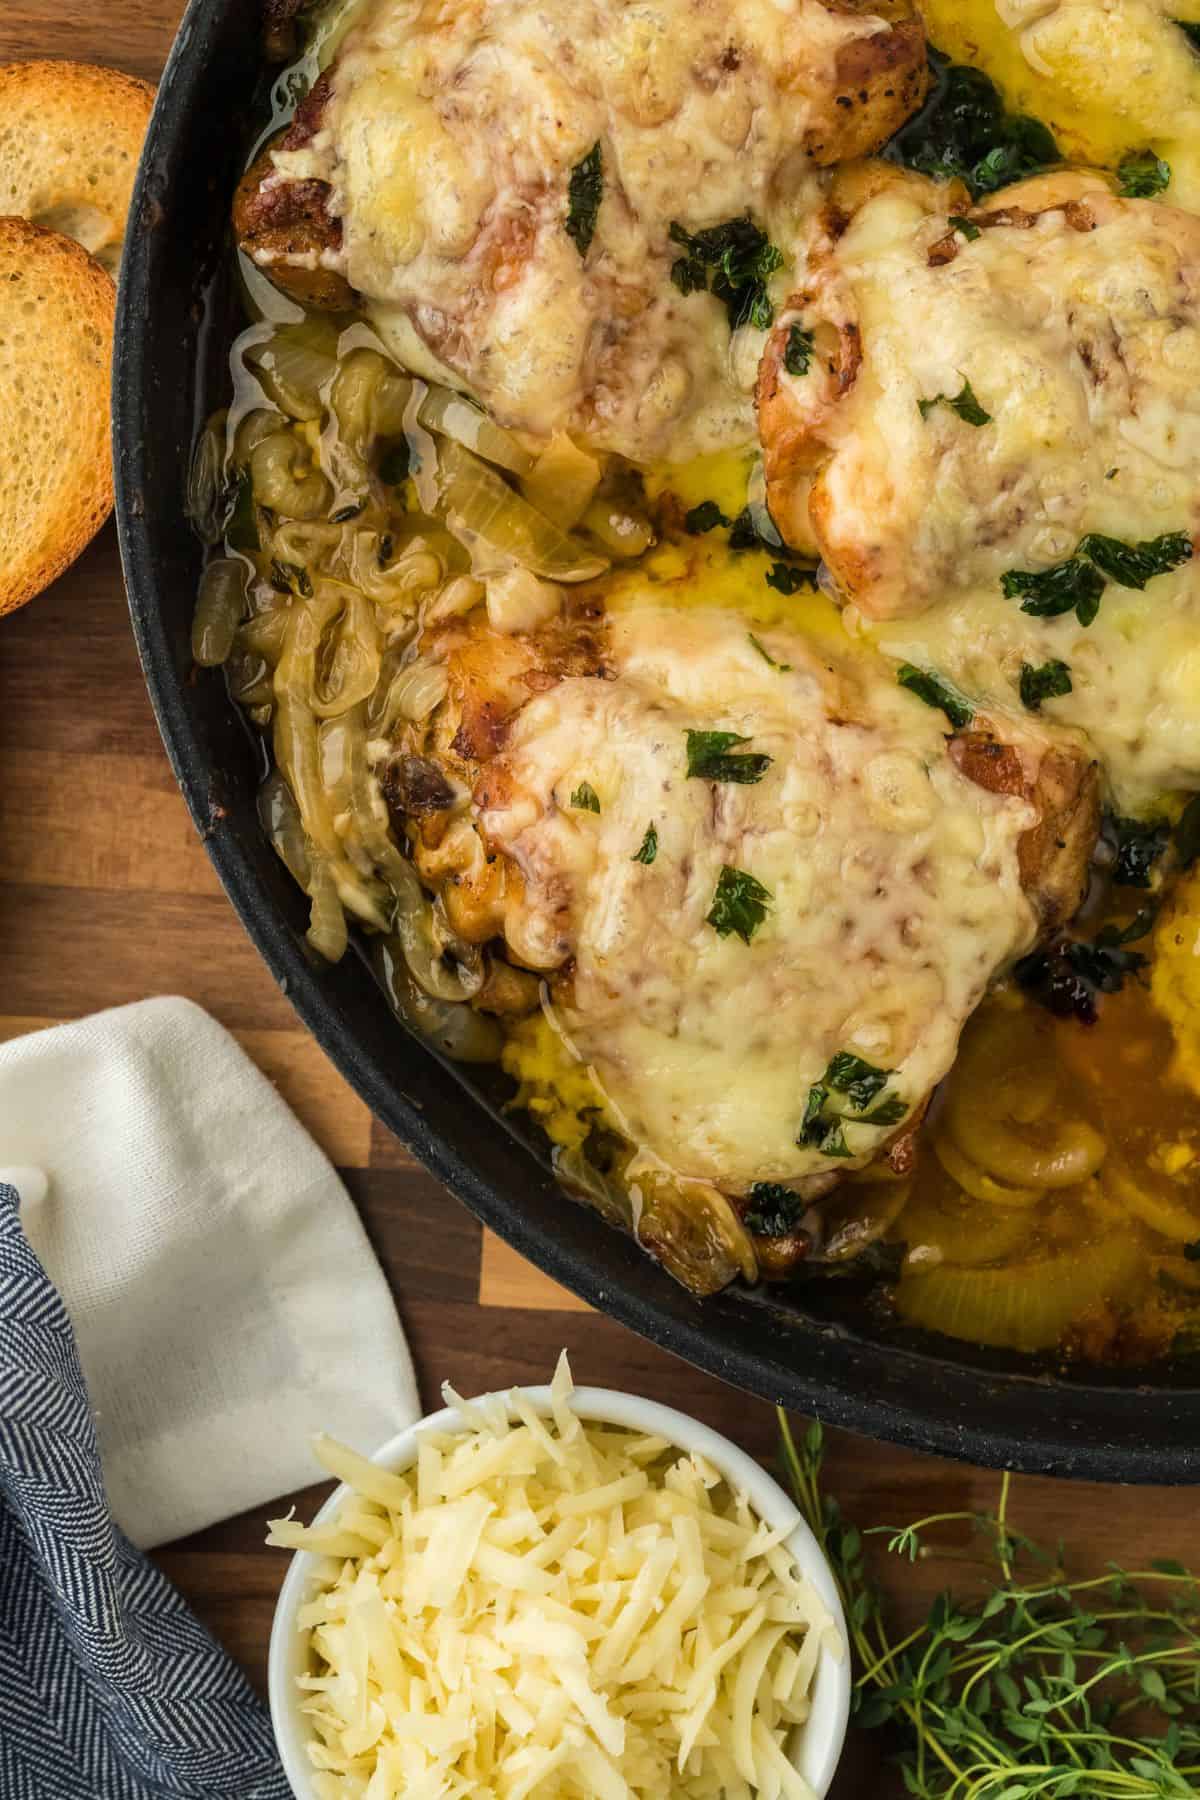 Closeup of french onion chicken in a skillet on a wooden cutting board. Next to it there are ingredients like shredded cheese, and toasted baguette slices